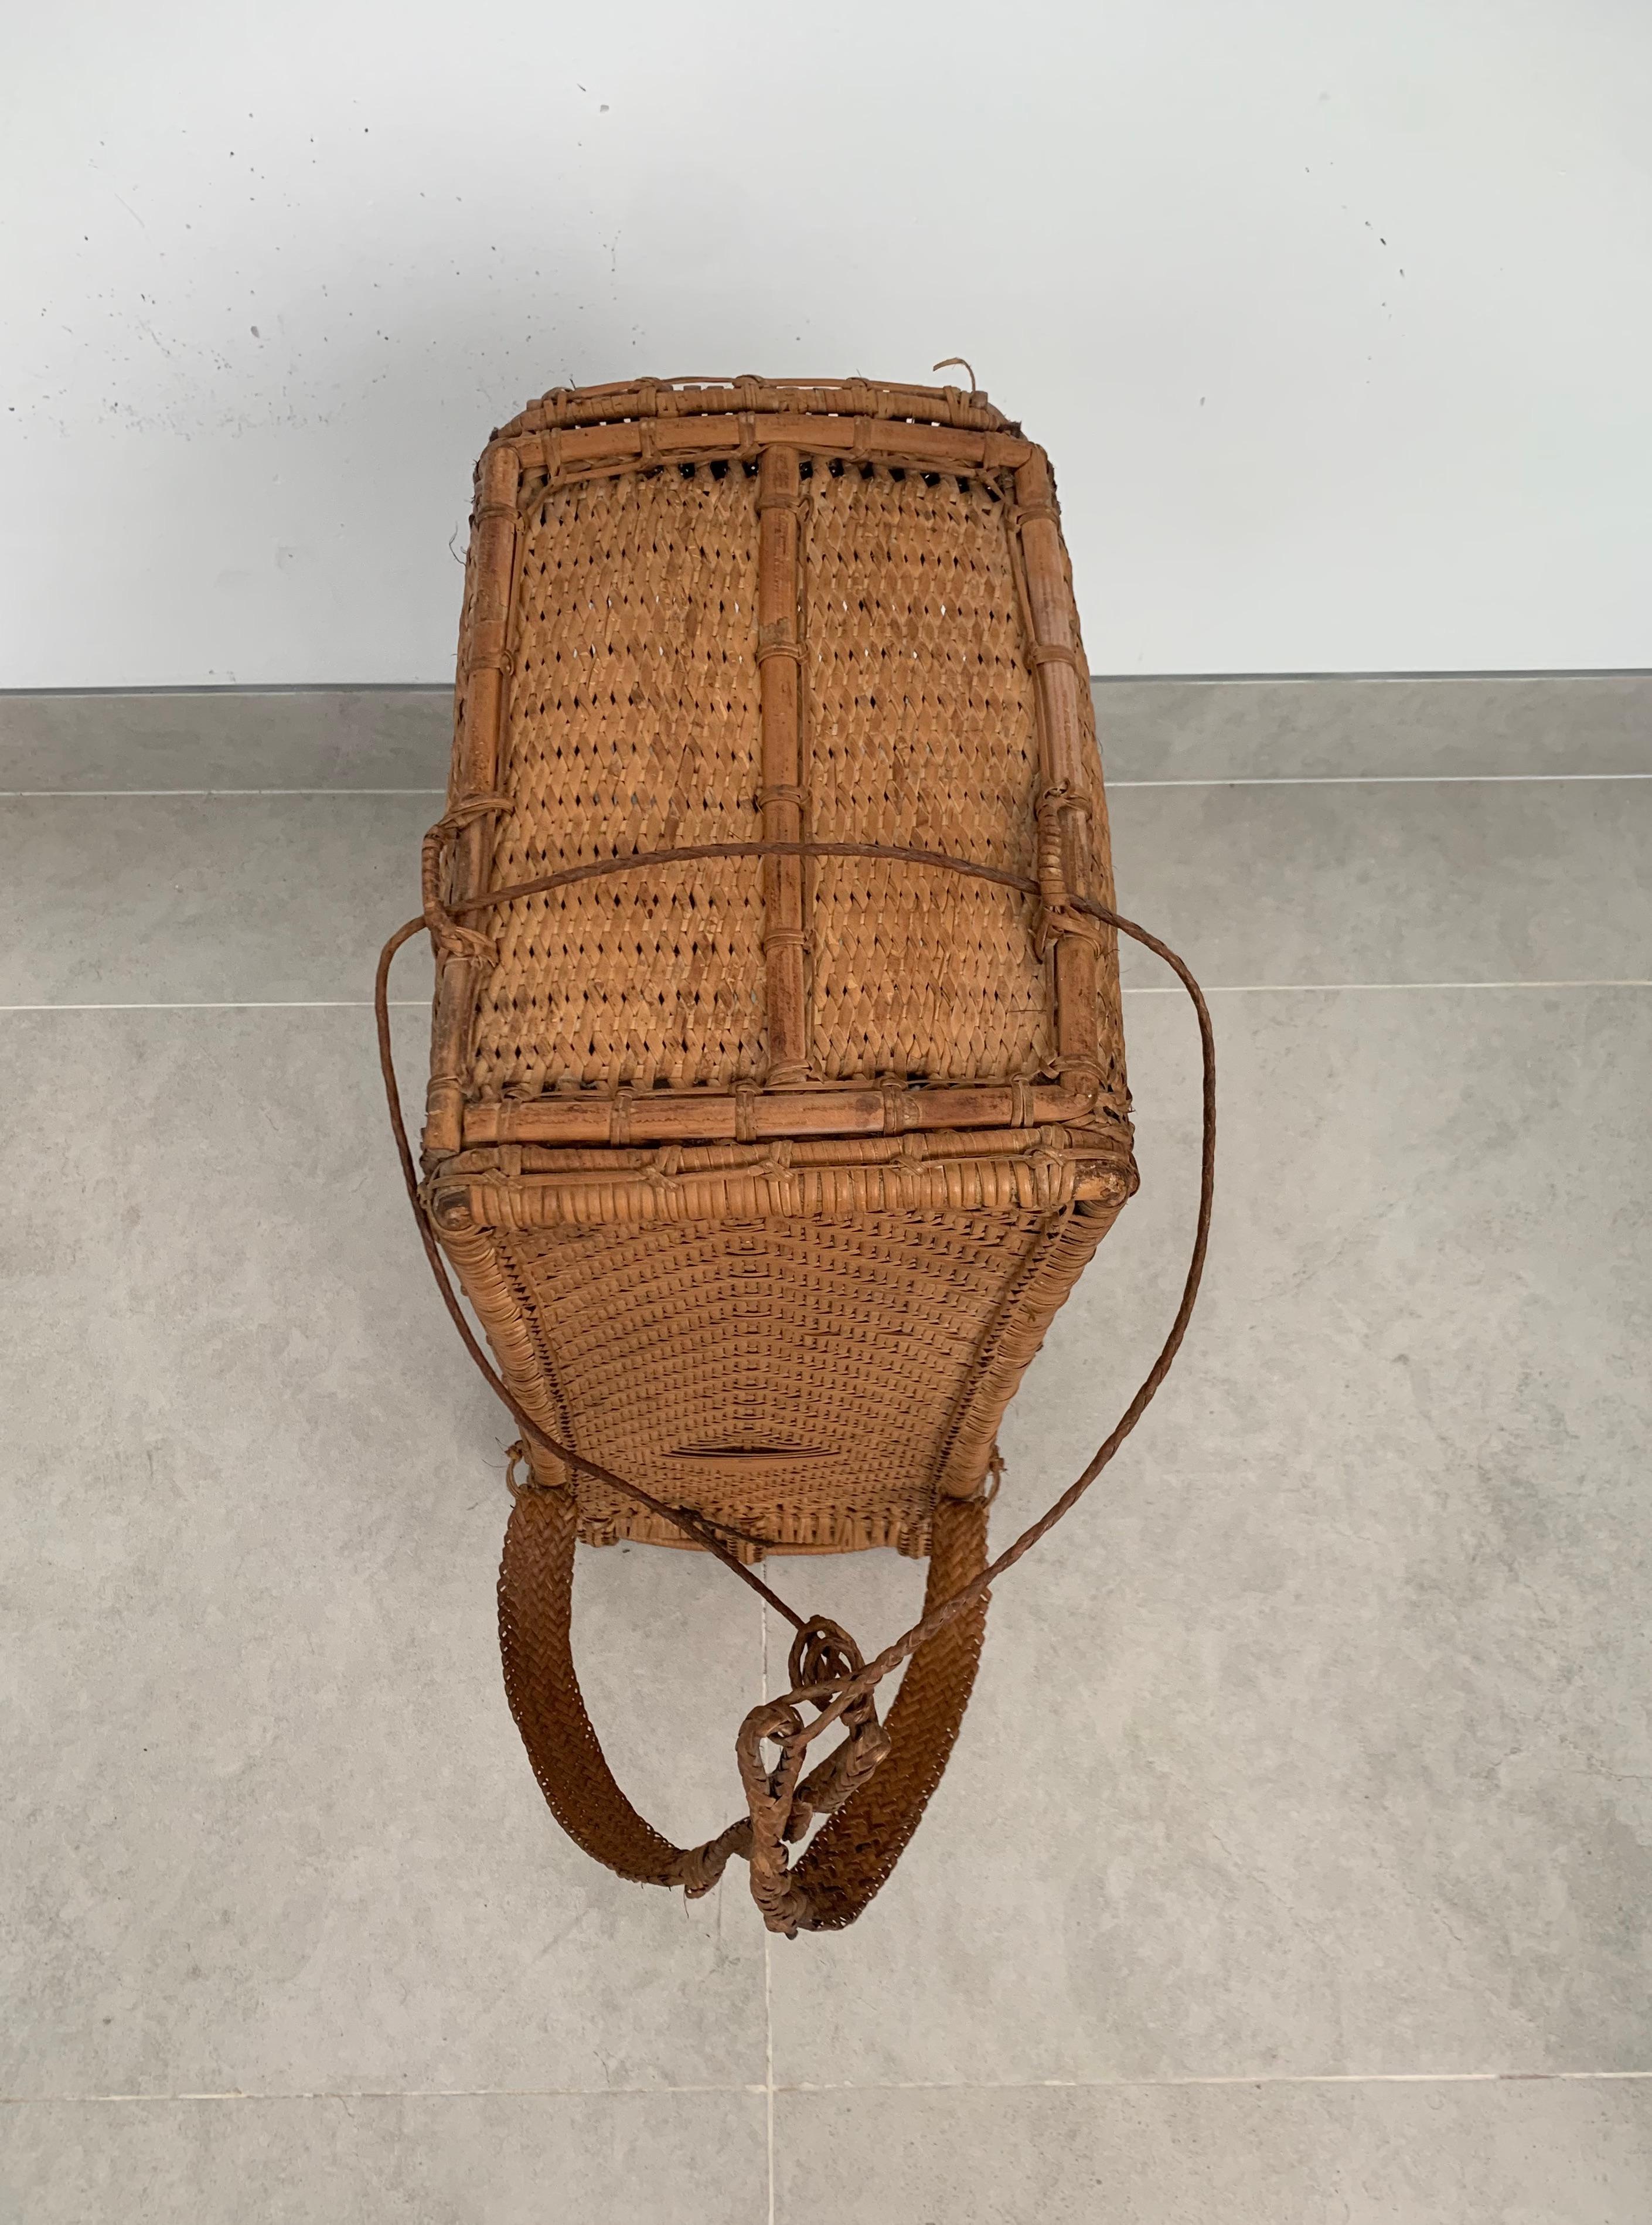 Rattan Basket Dayak Tribe Hand-Woven with Straps from Kalimantan, Borneo 3